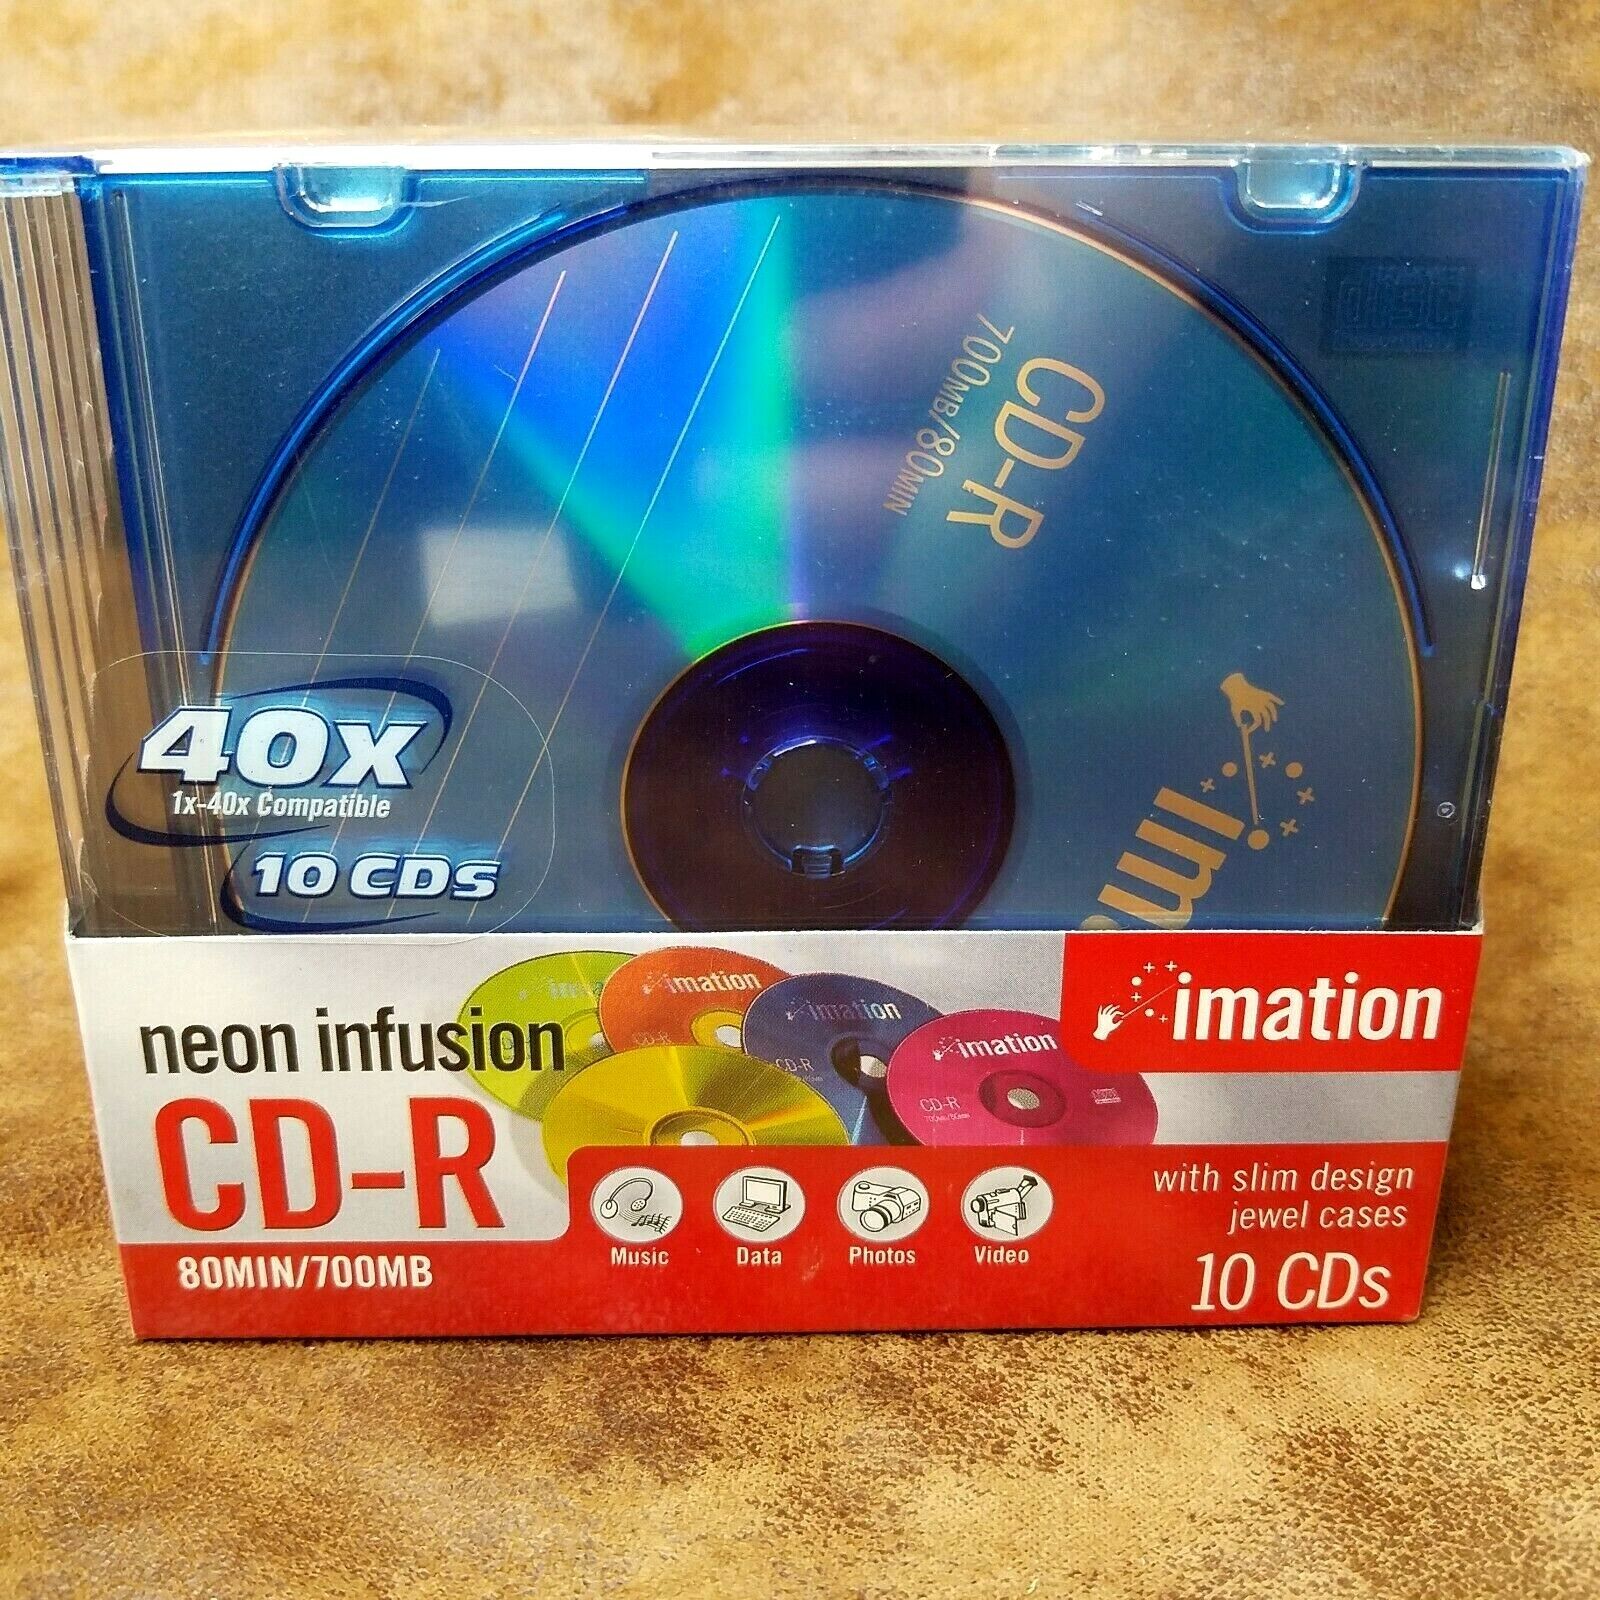 Imation Neon Infusion CD-R 40X 700MB 80min Factory Sealed Jewel Cases Pack of 10